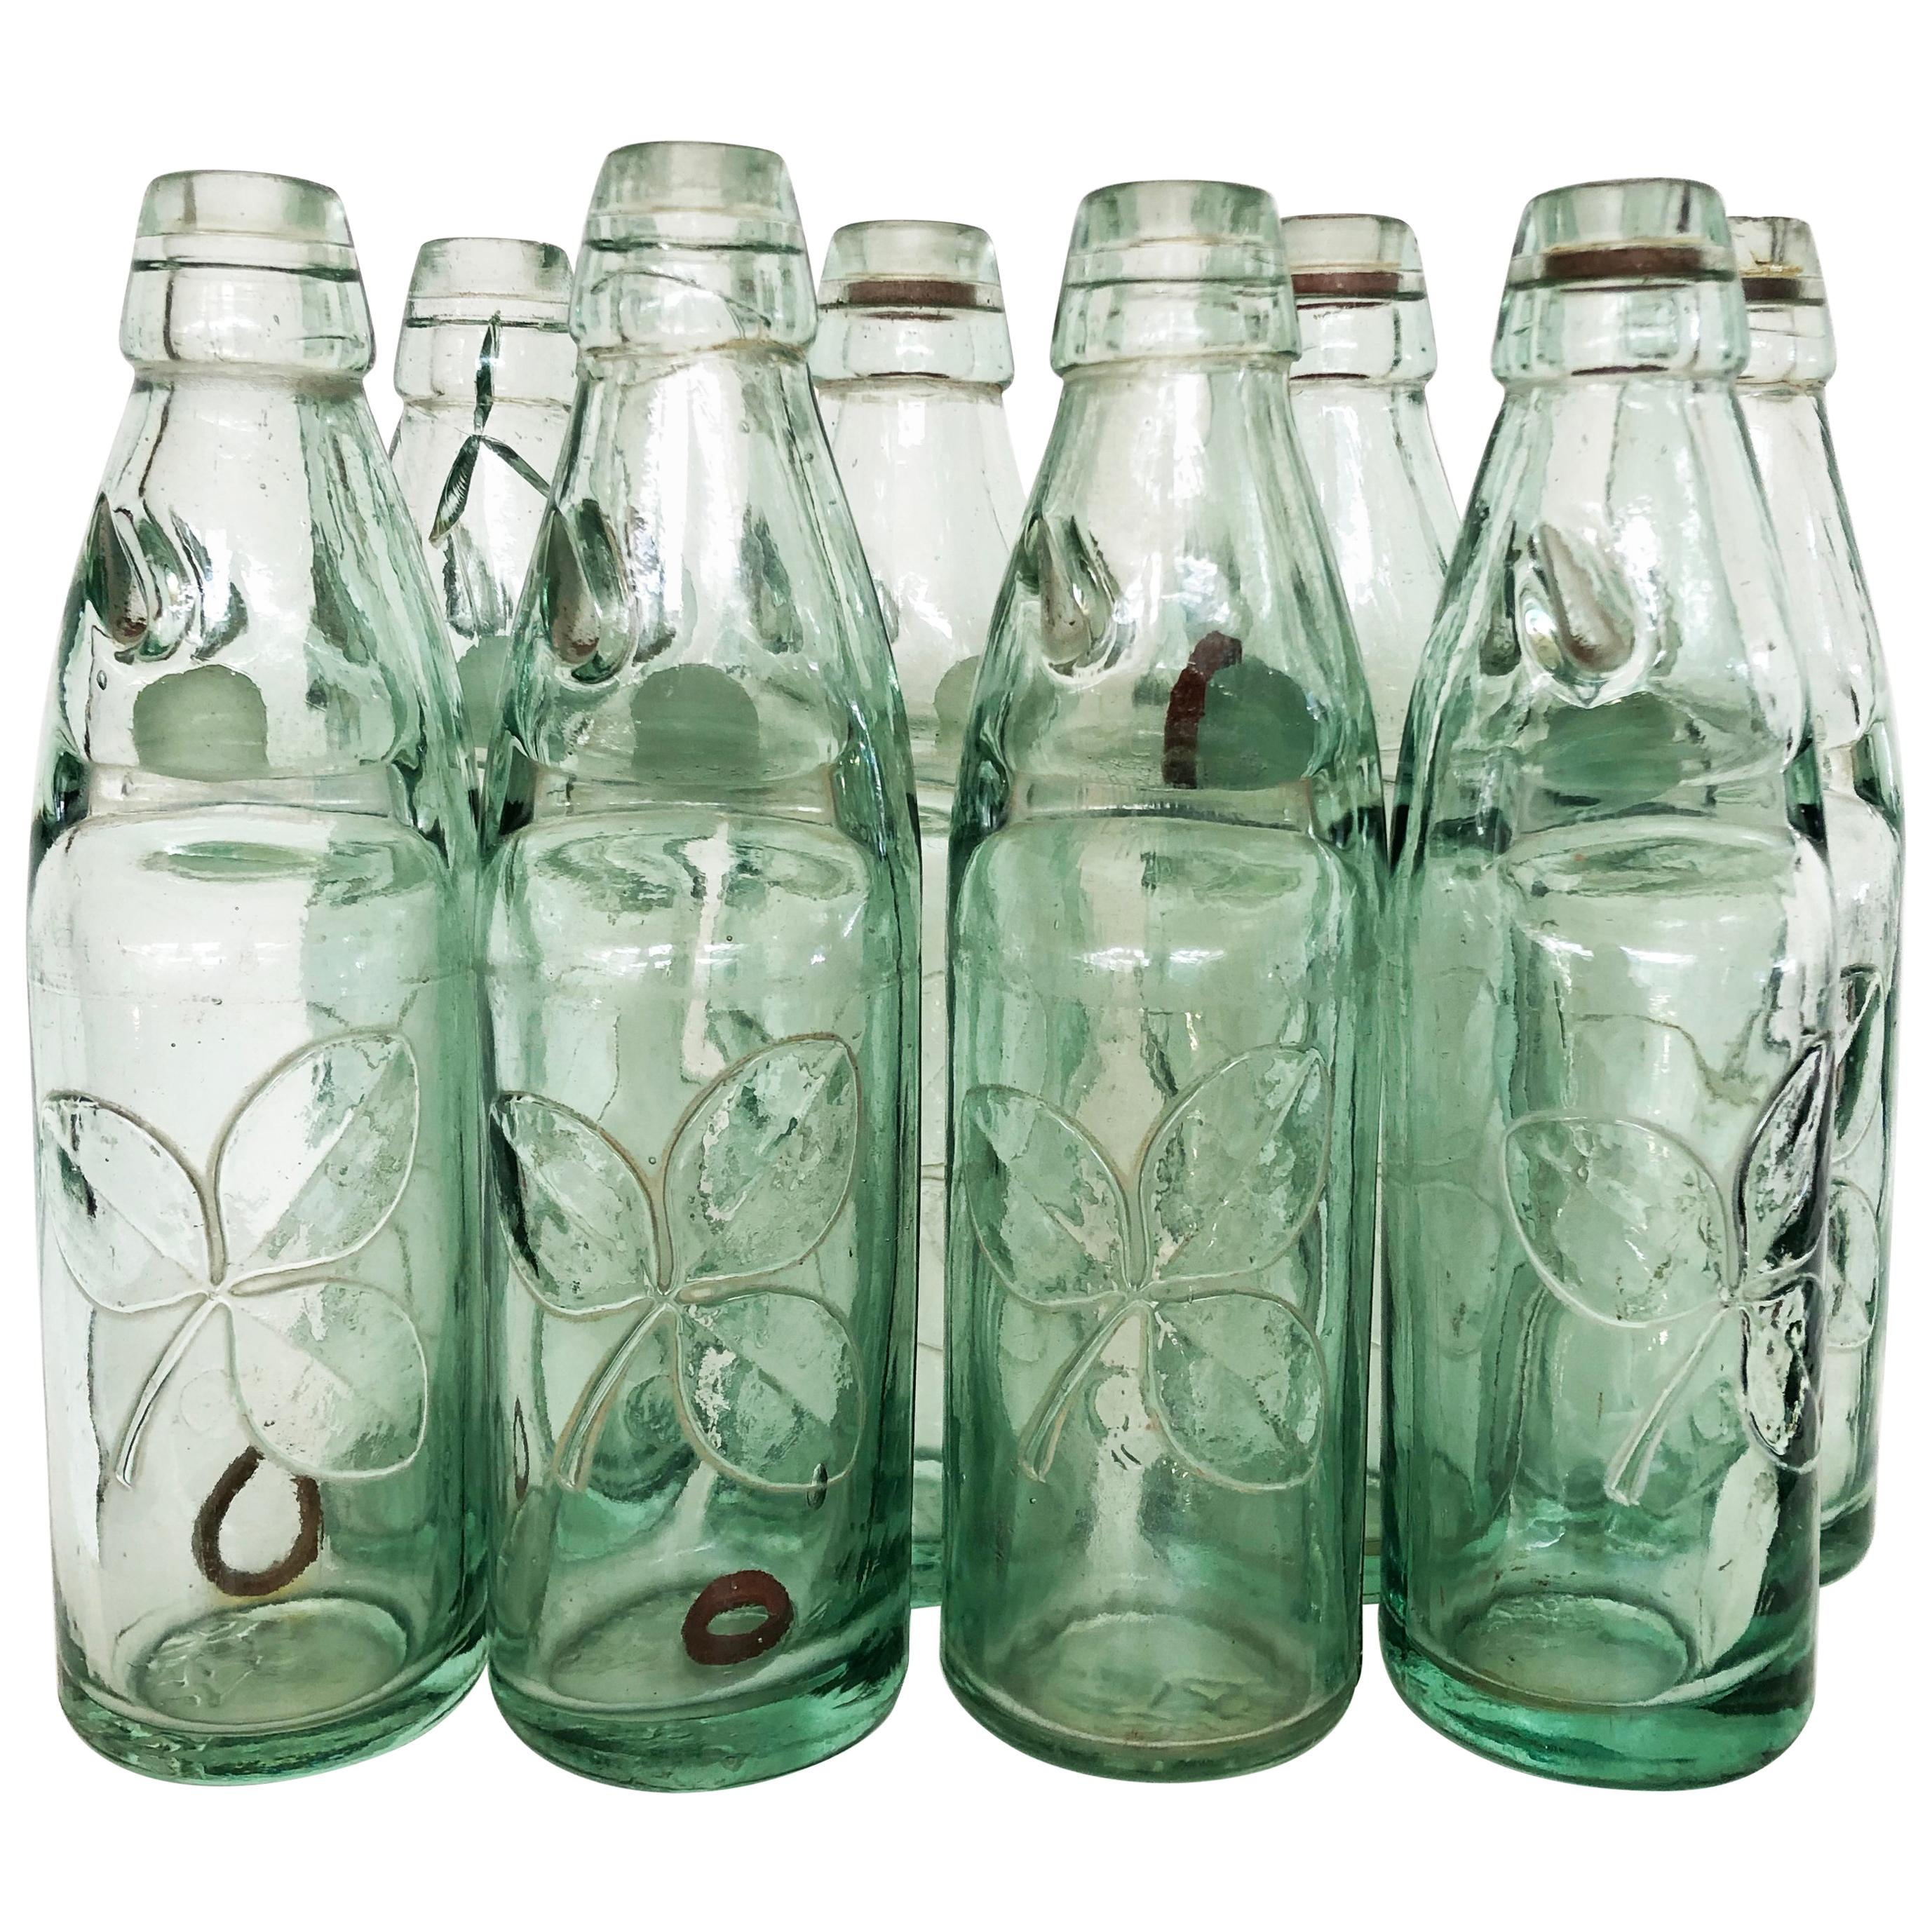 Antique 19th Century Mexican Codd Neck Glass Soda Bottles, Set of 6